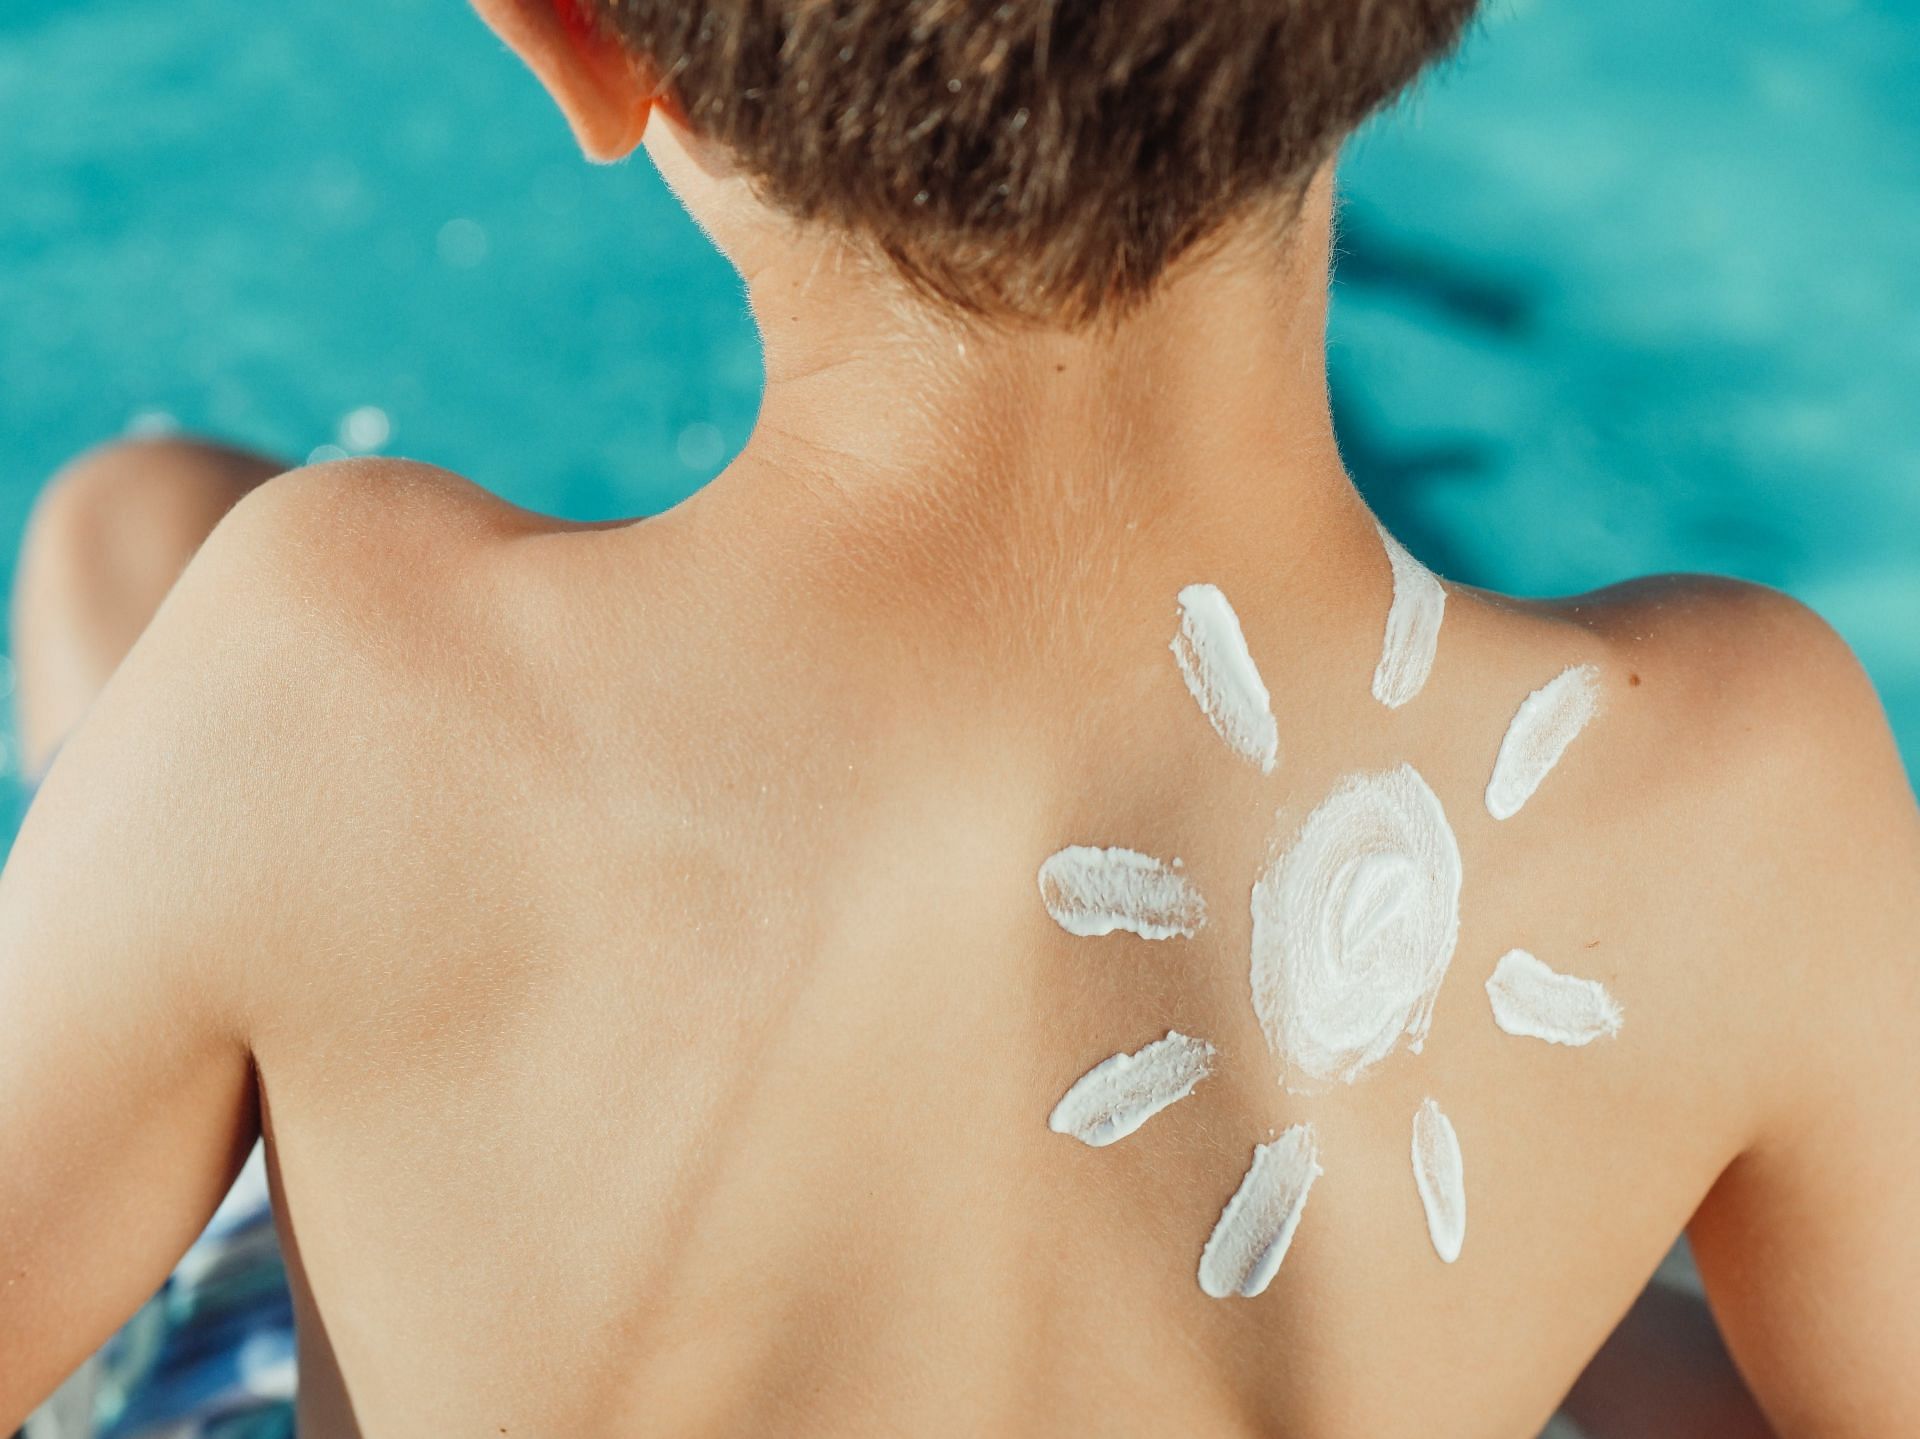 how often to use sunscreen (image sourced via Pexels / Photo by kindel)